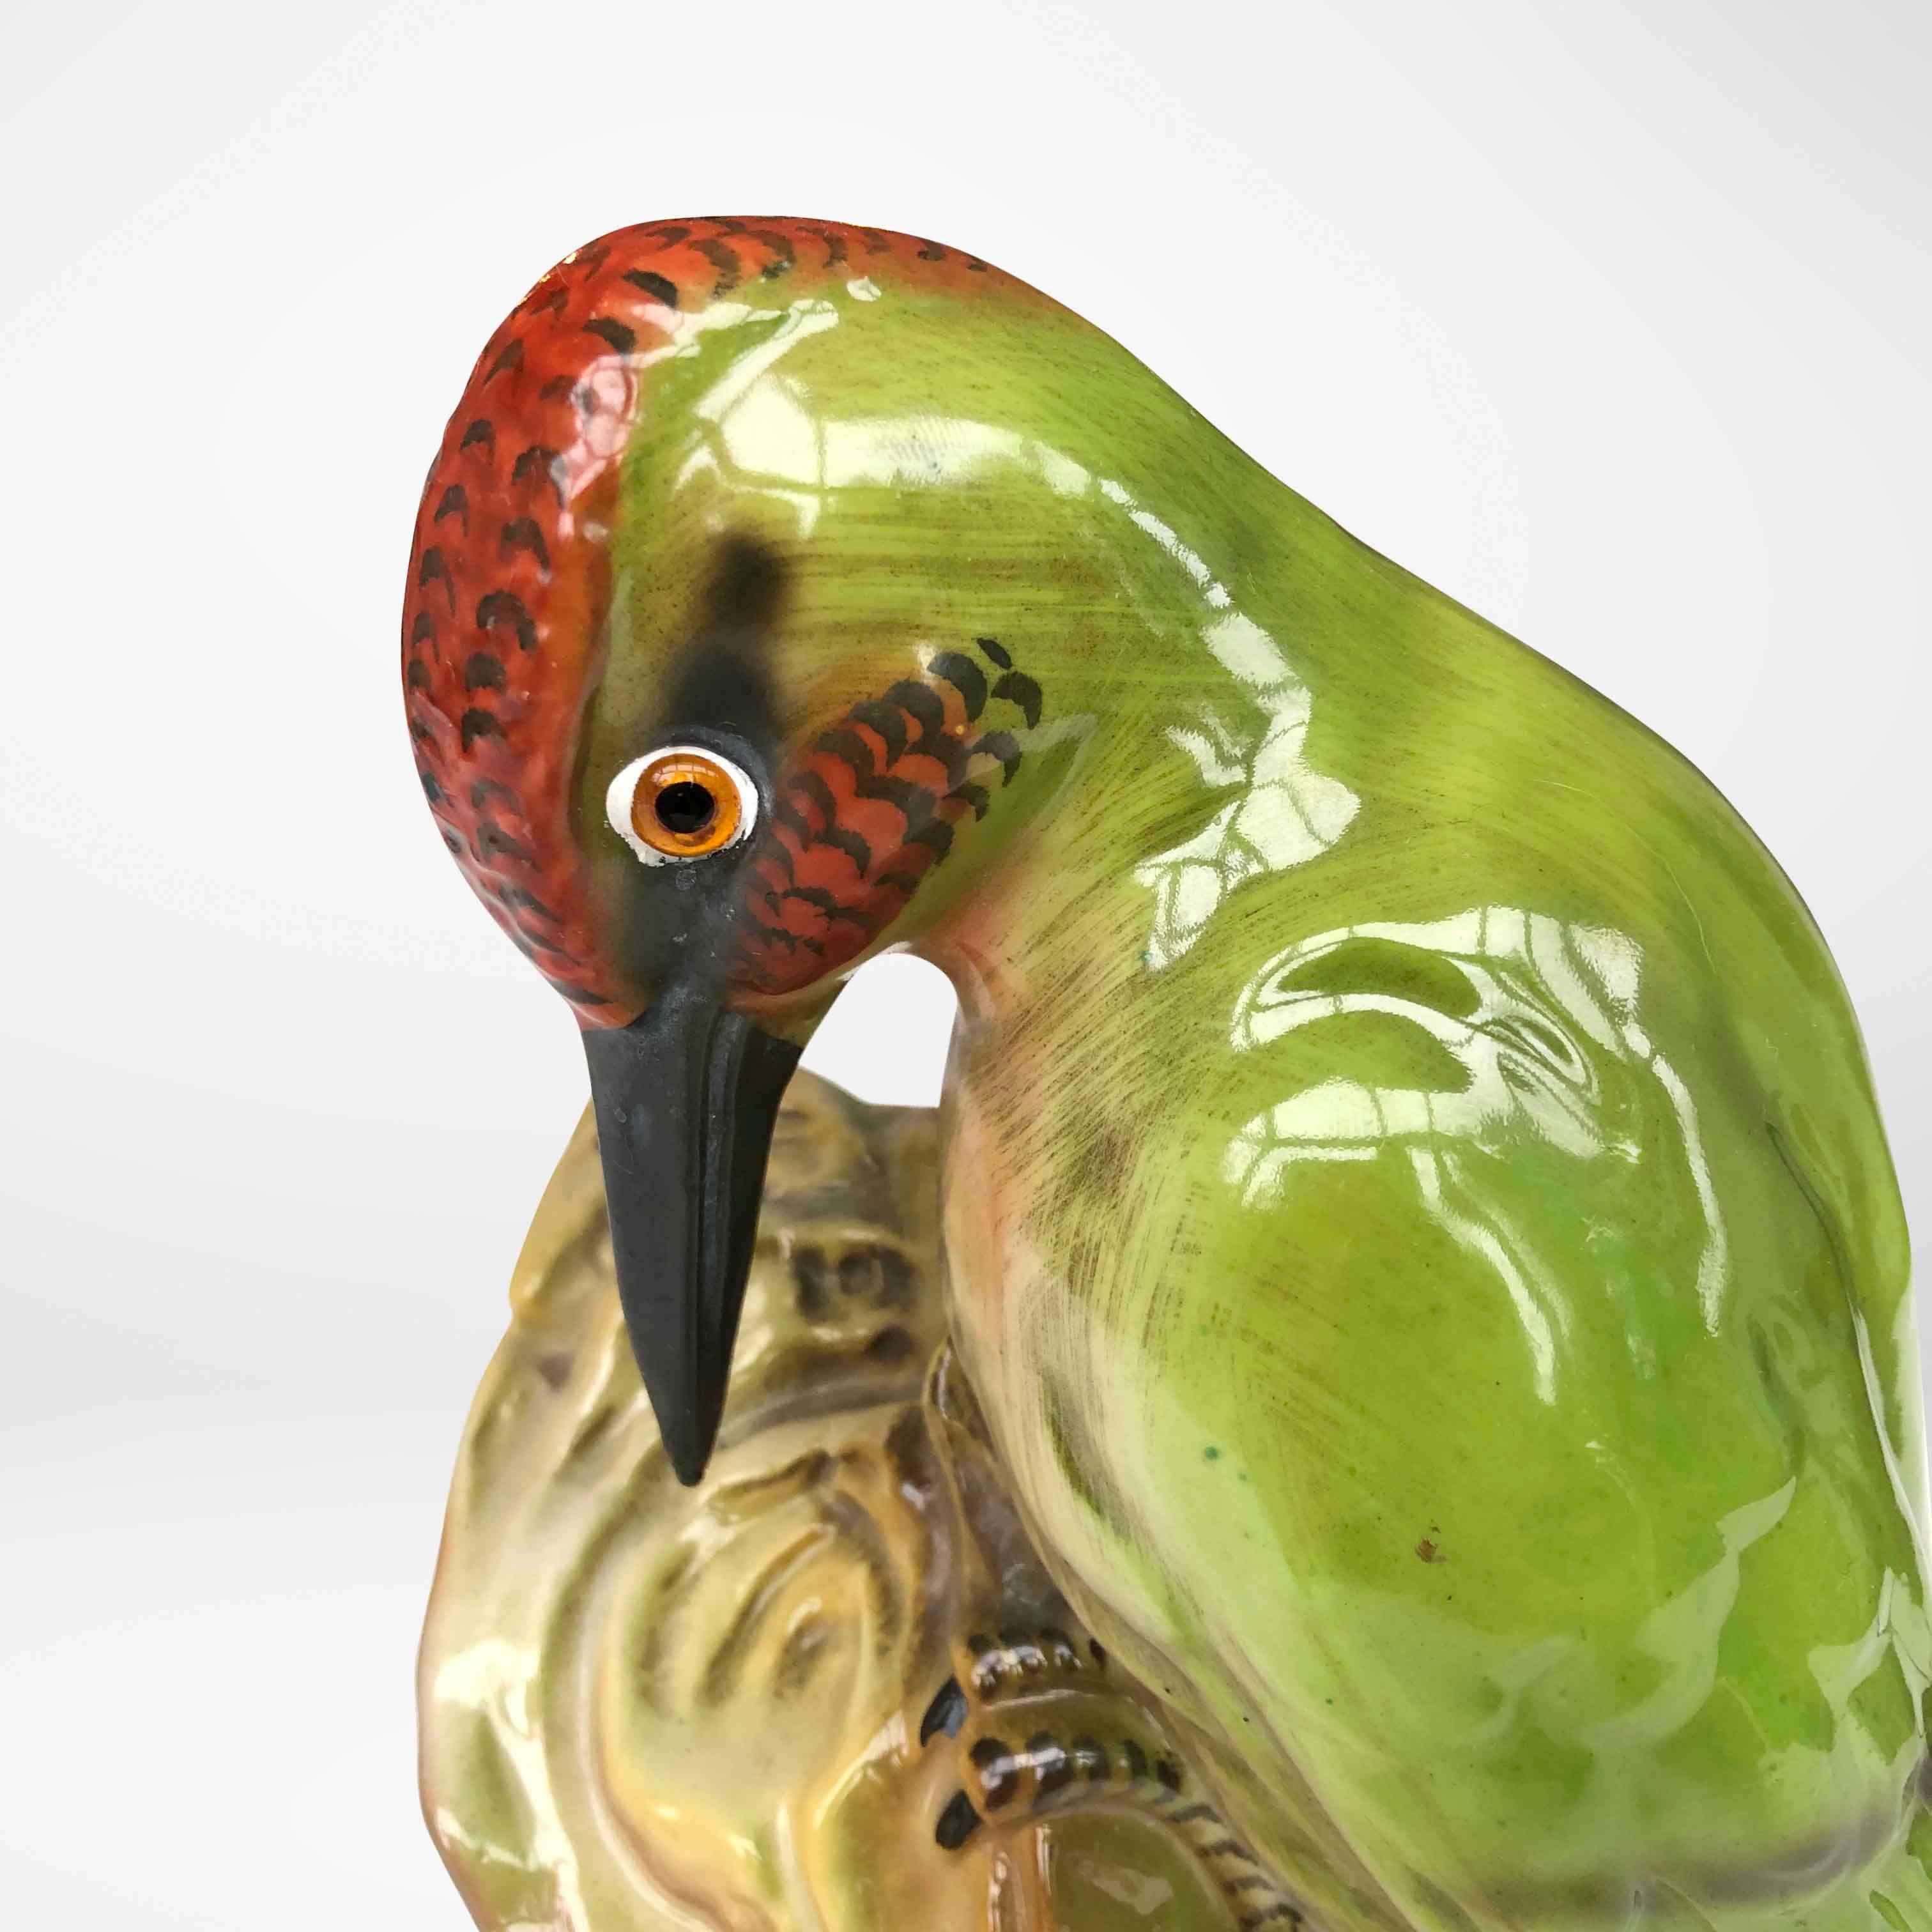 Cute lamp in porcelain of a woodpecker. These lamps were produced in the past in the shape of all kinds of animals and used as a fragrance or perfume lamp to combat the smell of cigarette smoke. The lamp is in perfect condition and has beautiful